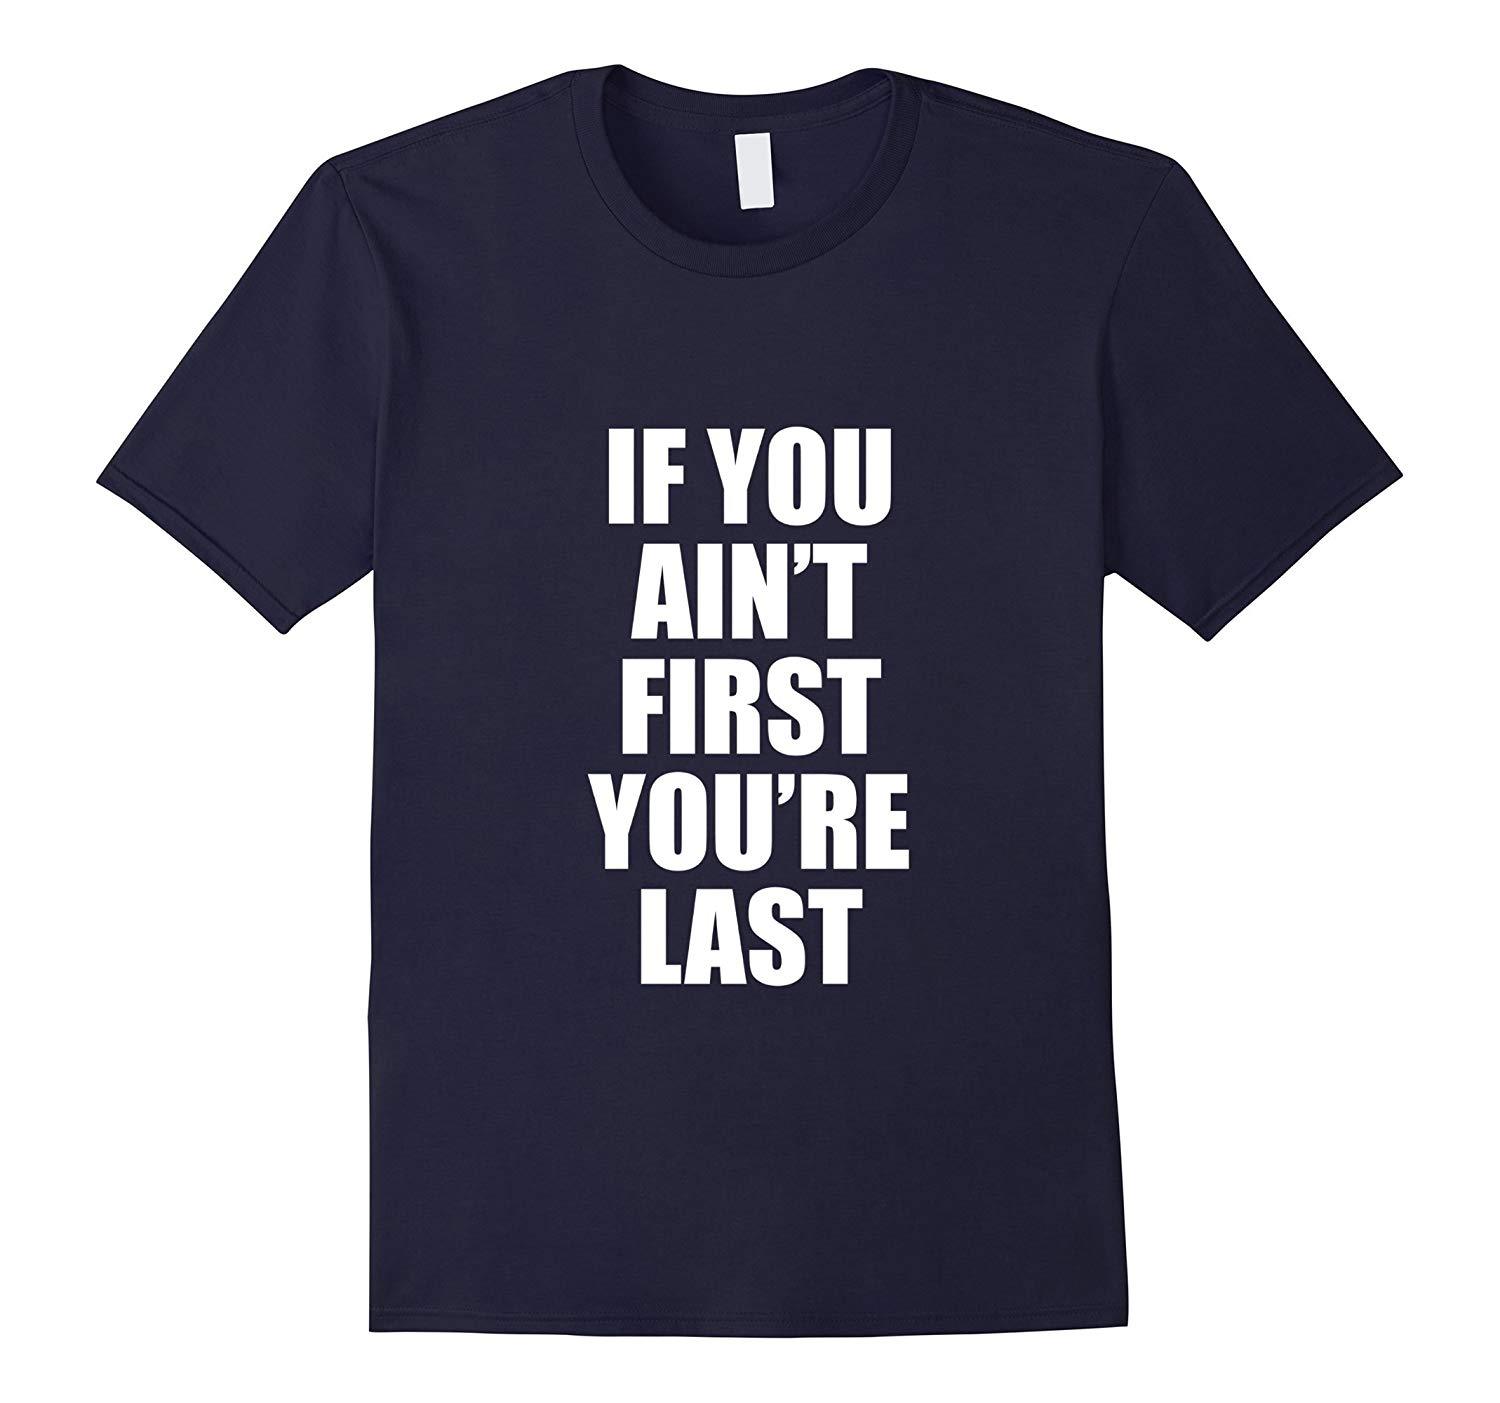 New Shirts - If you ain't first you're last tshirt Men - T-Shirts